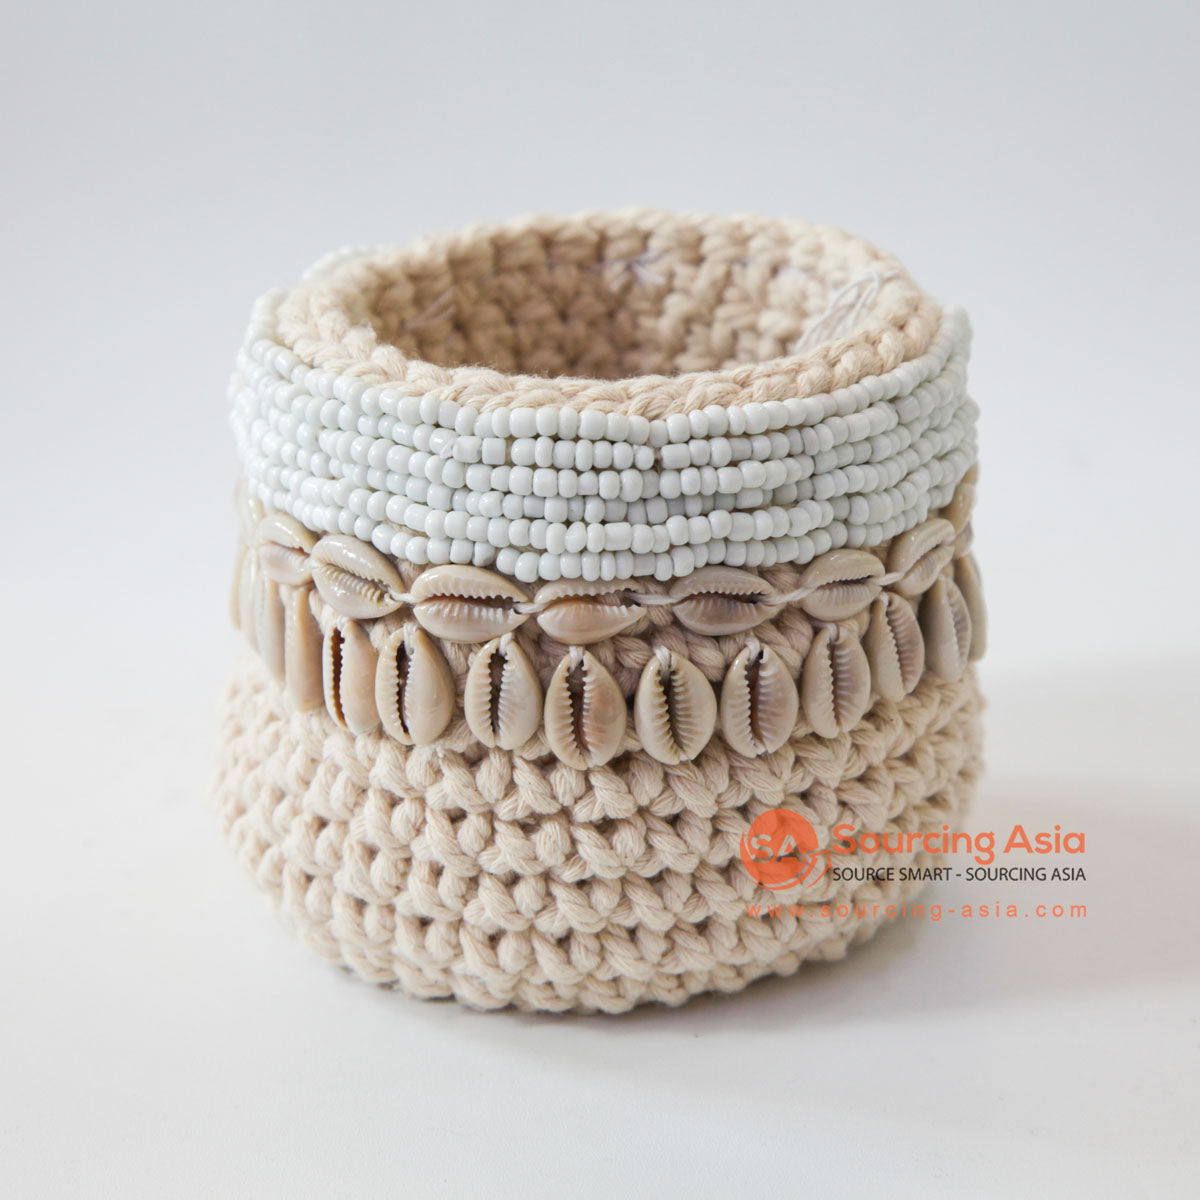 DHL119 CREAM AND WHITE MACRAME AND SHELL SMALL BASKET